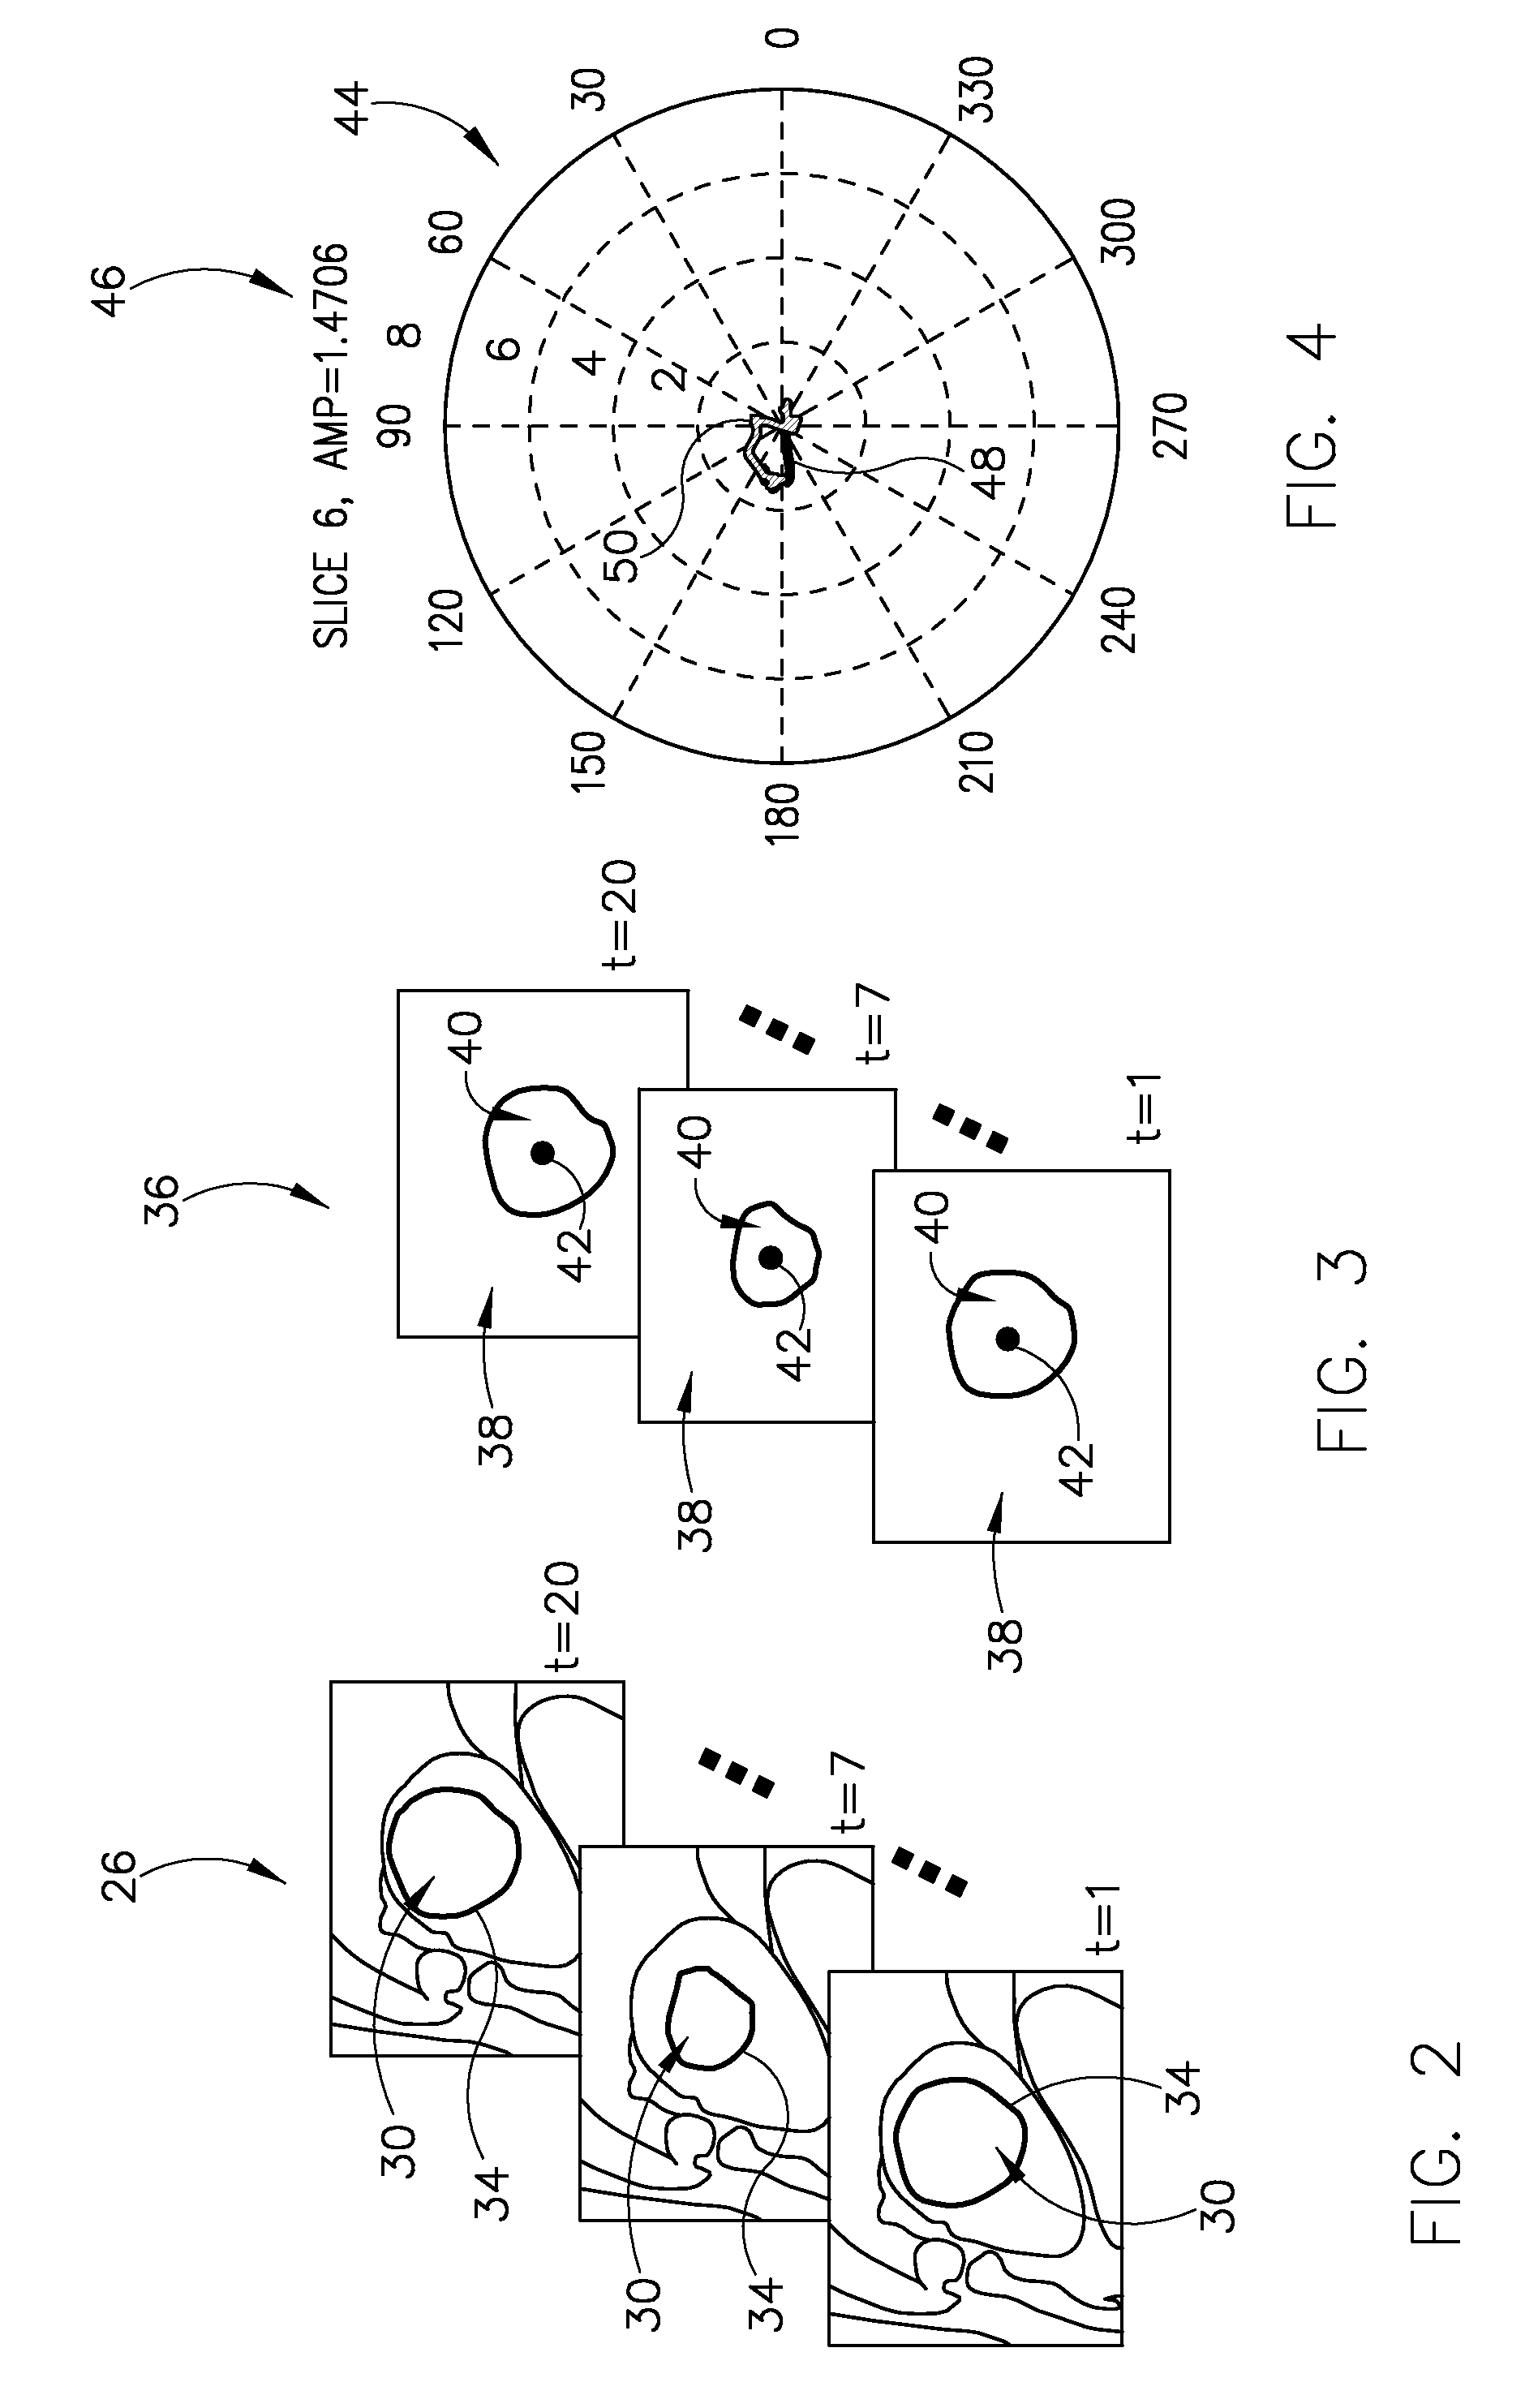 System and method for center point trajectory mapping